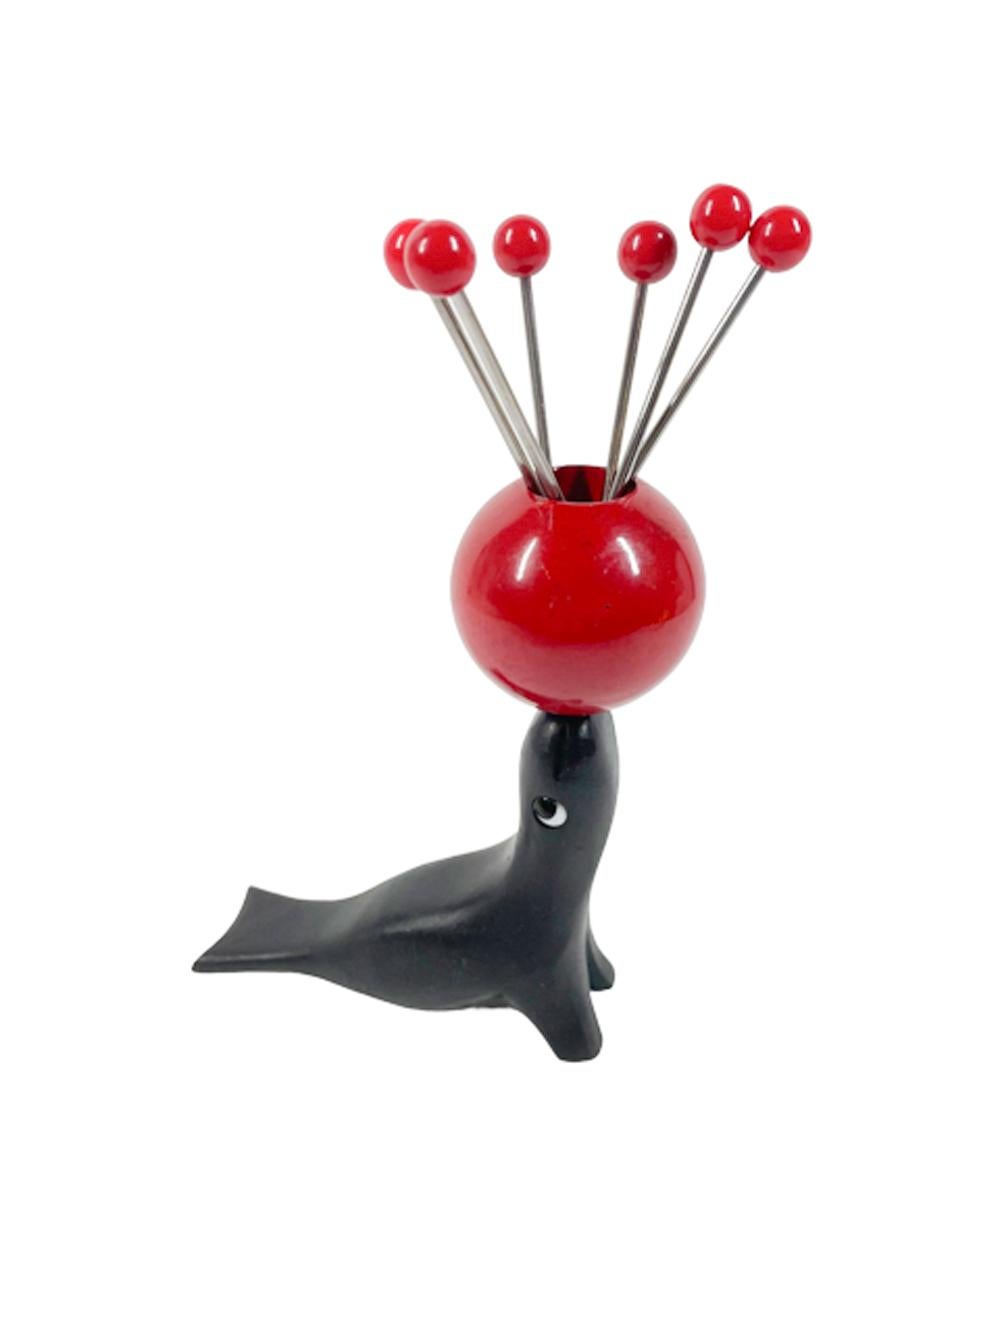 Art Deco cocktail pick set, carved and painted wood seal with glass eyes balancing a red painted wood ball on its nose with six Bakelite topped metal cocktail picks. 